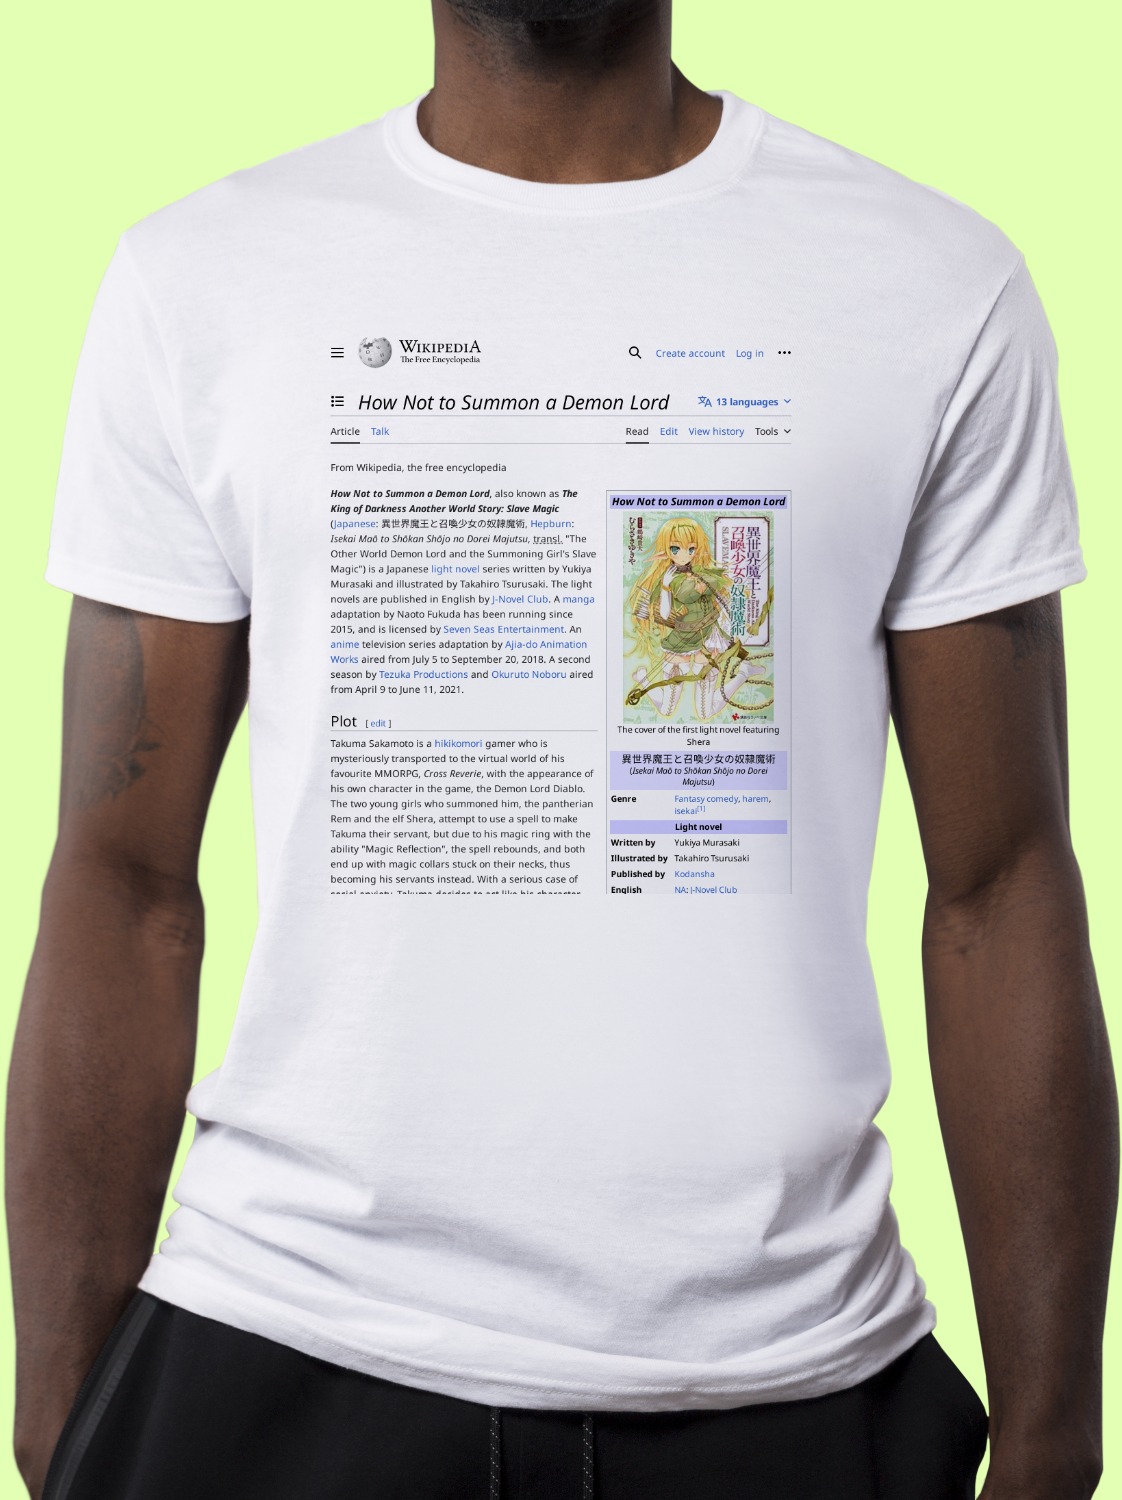 How_Not_to_Summon_a_Demon_Lord Wikipedia Shirt